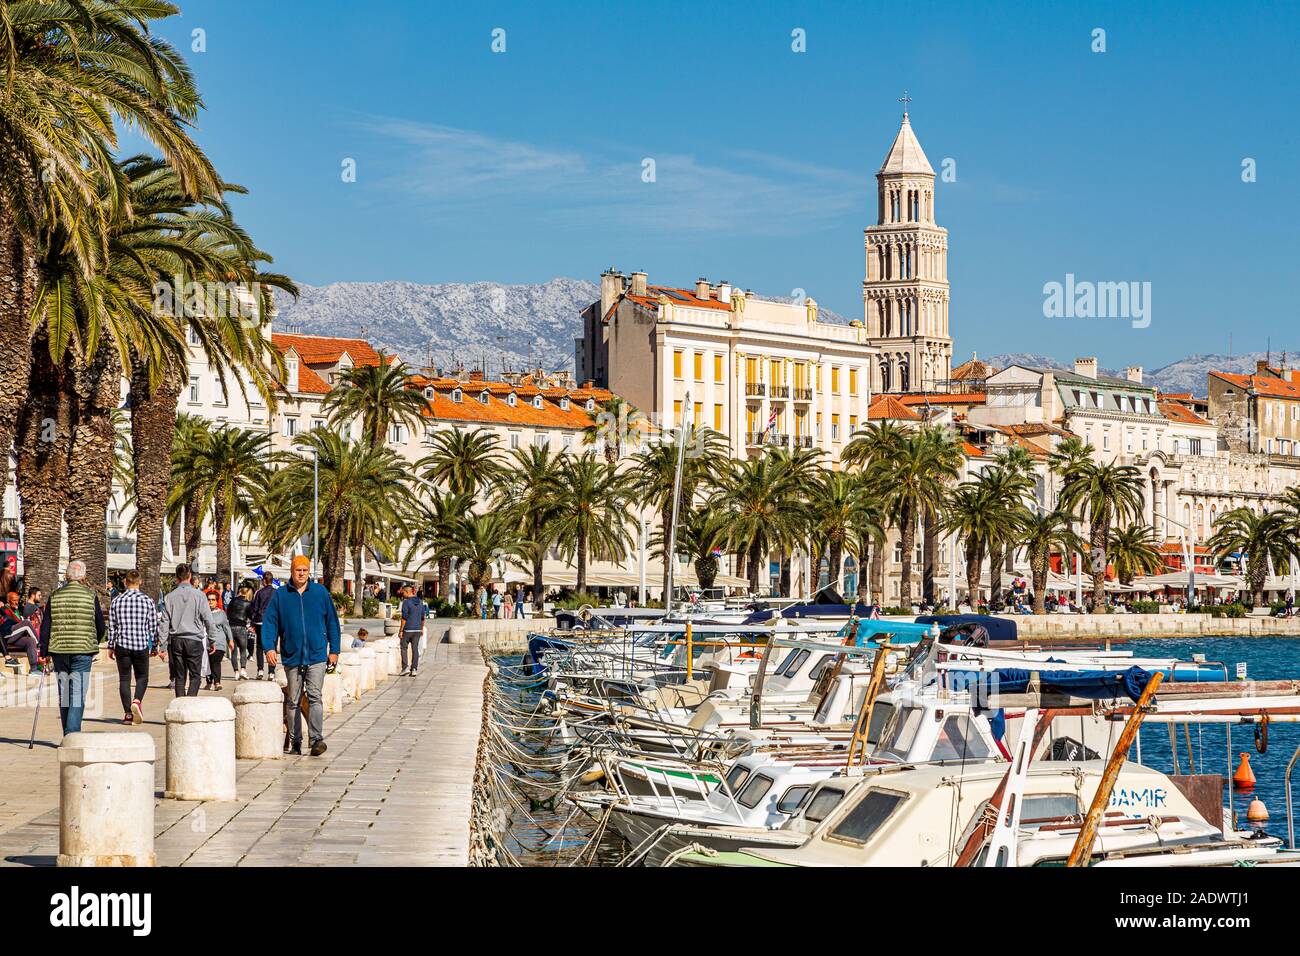 Panorama of people walking along the sunny waterside Riva promenade with the Cathedral of Saint Domnius, against blue sky, Split, Croatia Europe Stock Photo